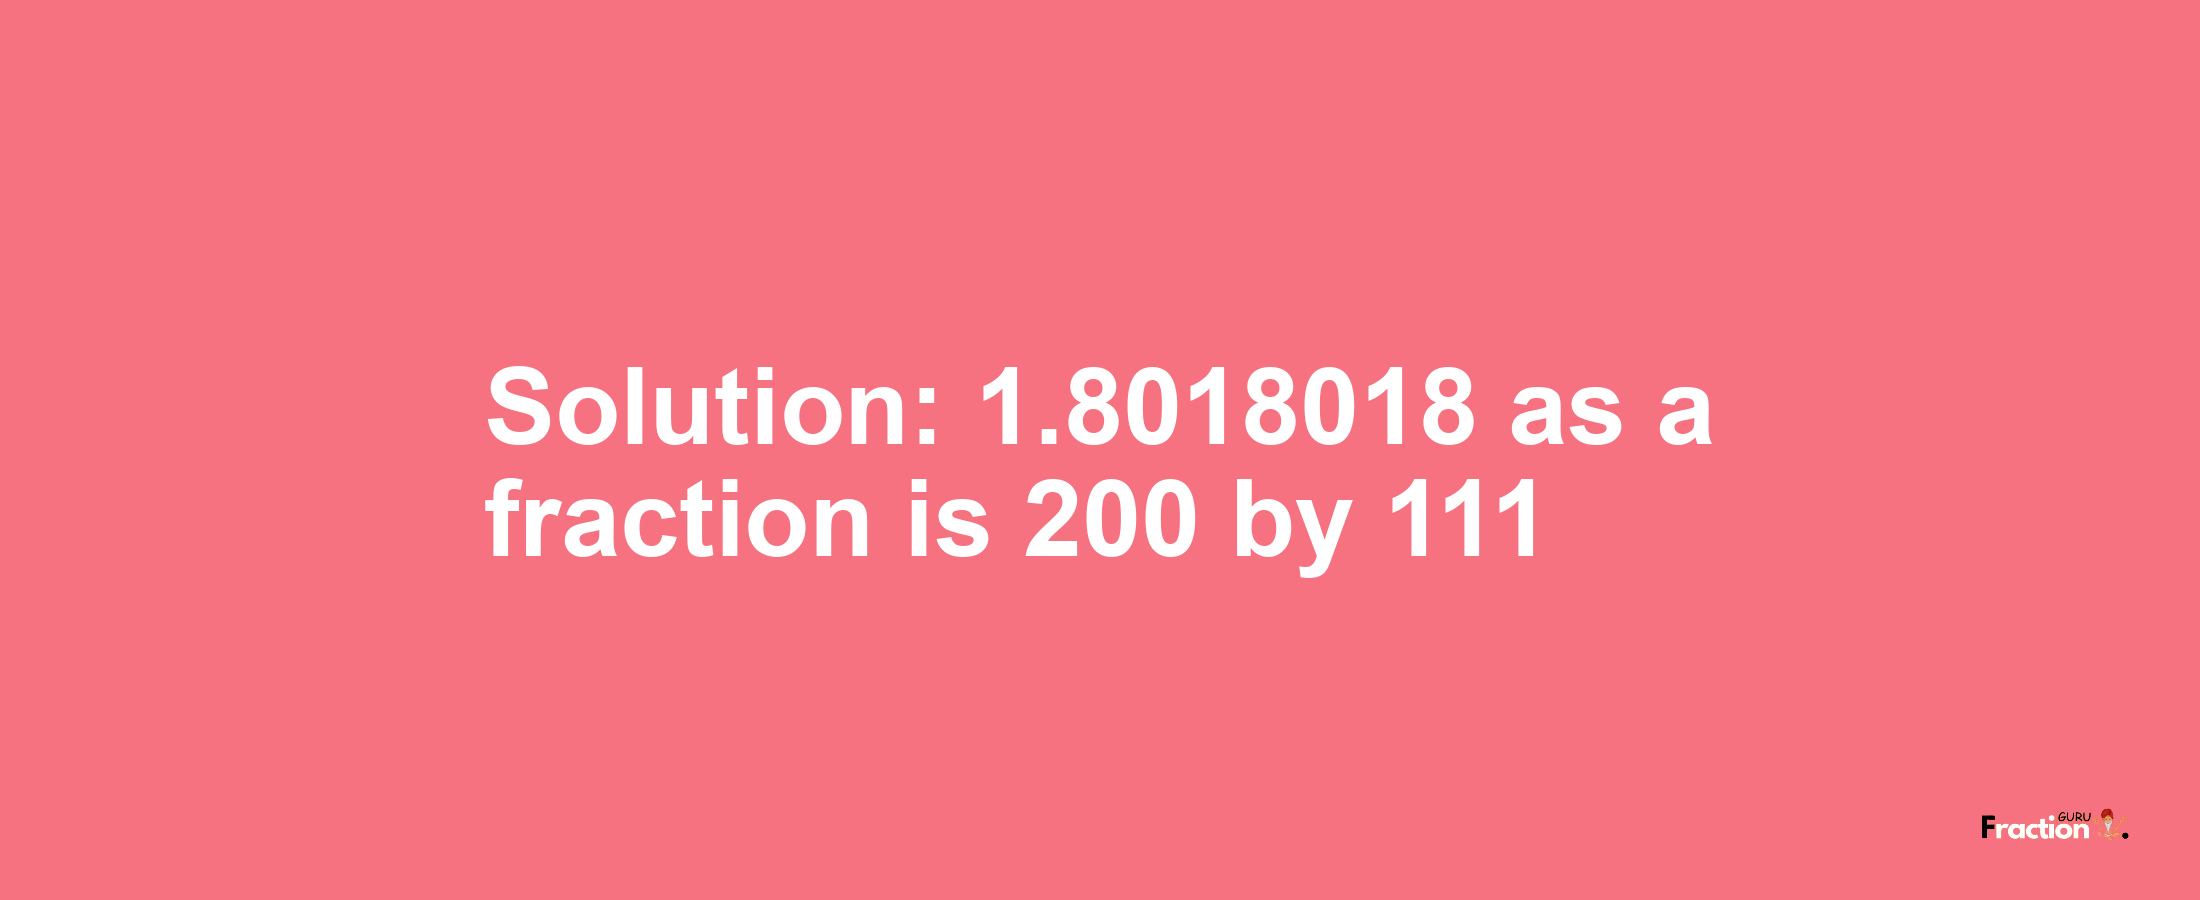 Solution:1.8018018 as a fraction is 200/111